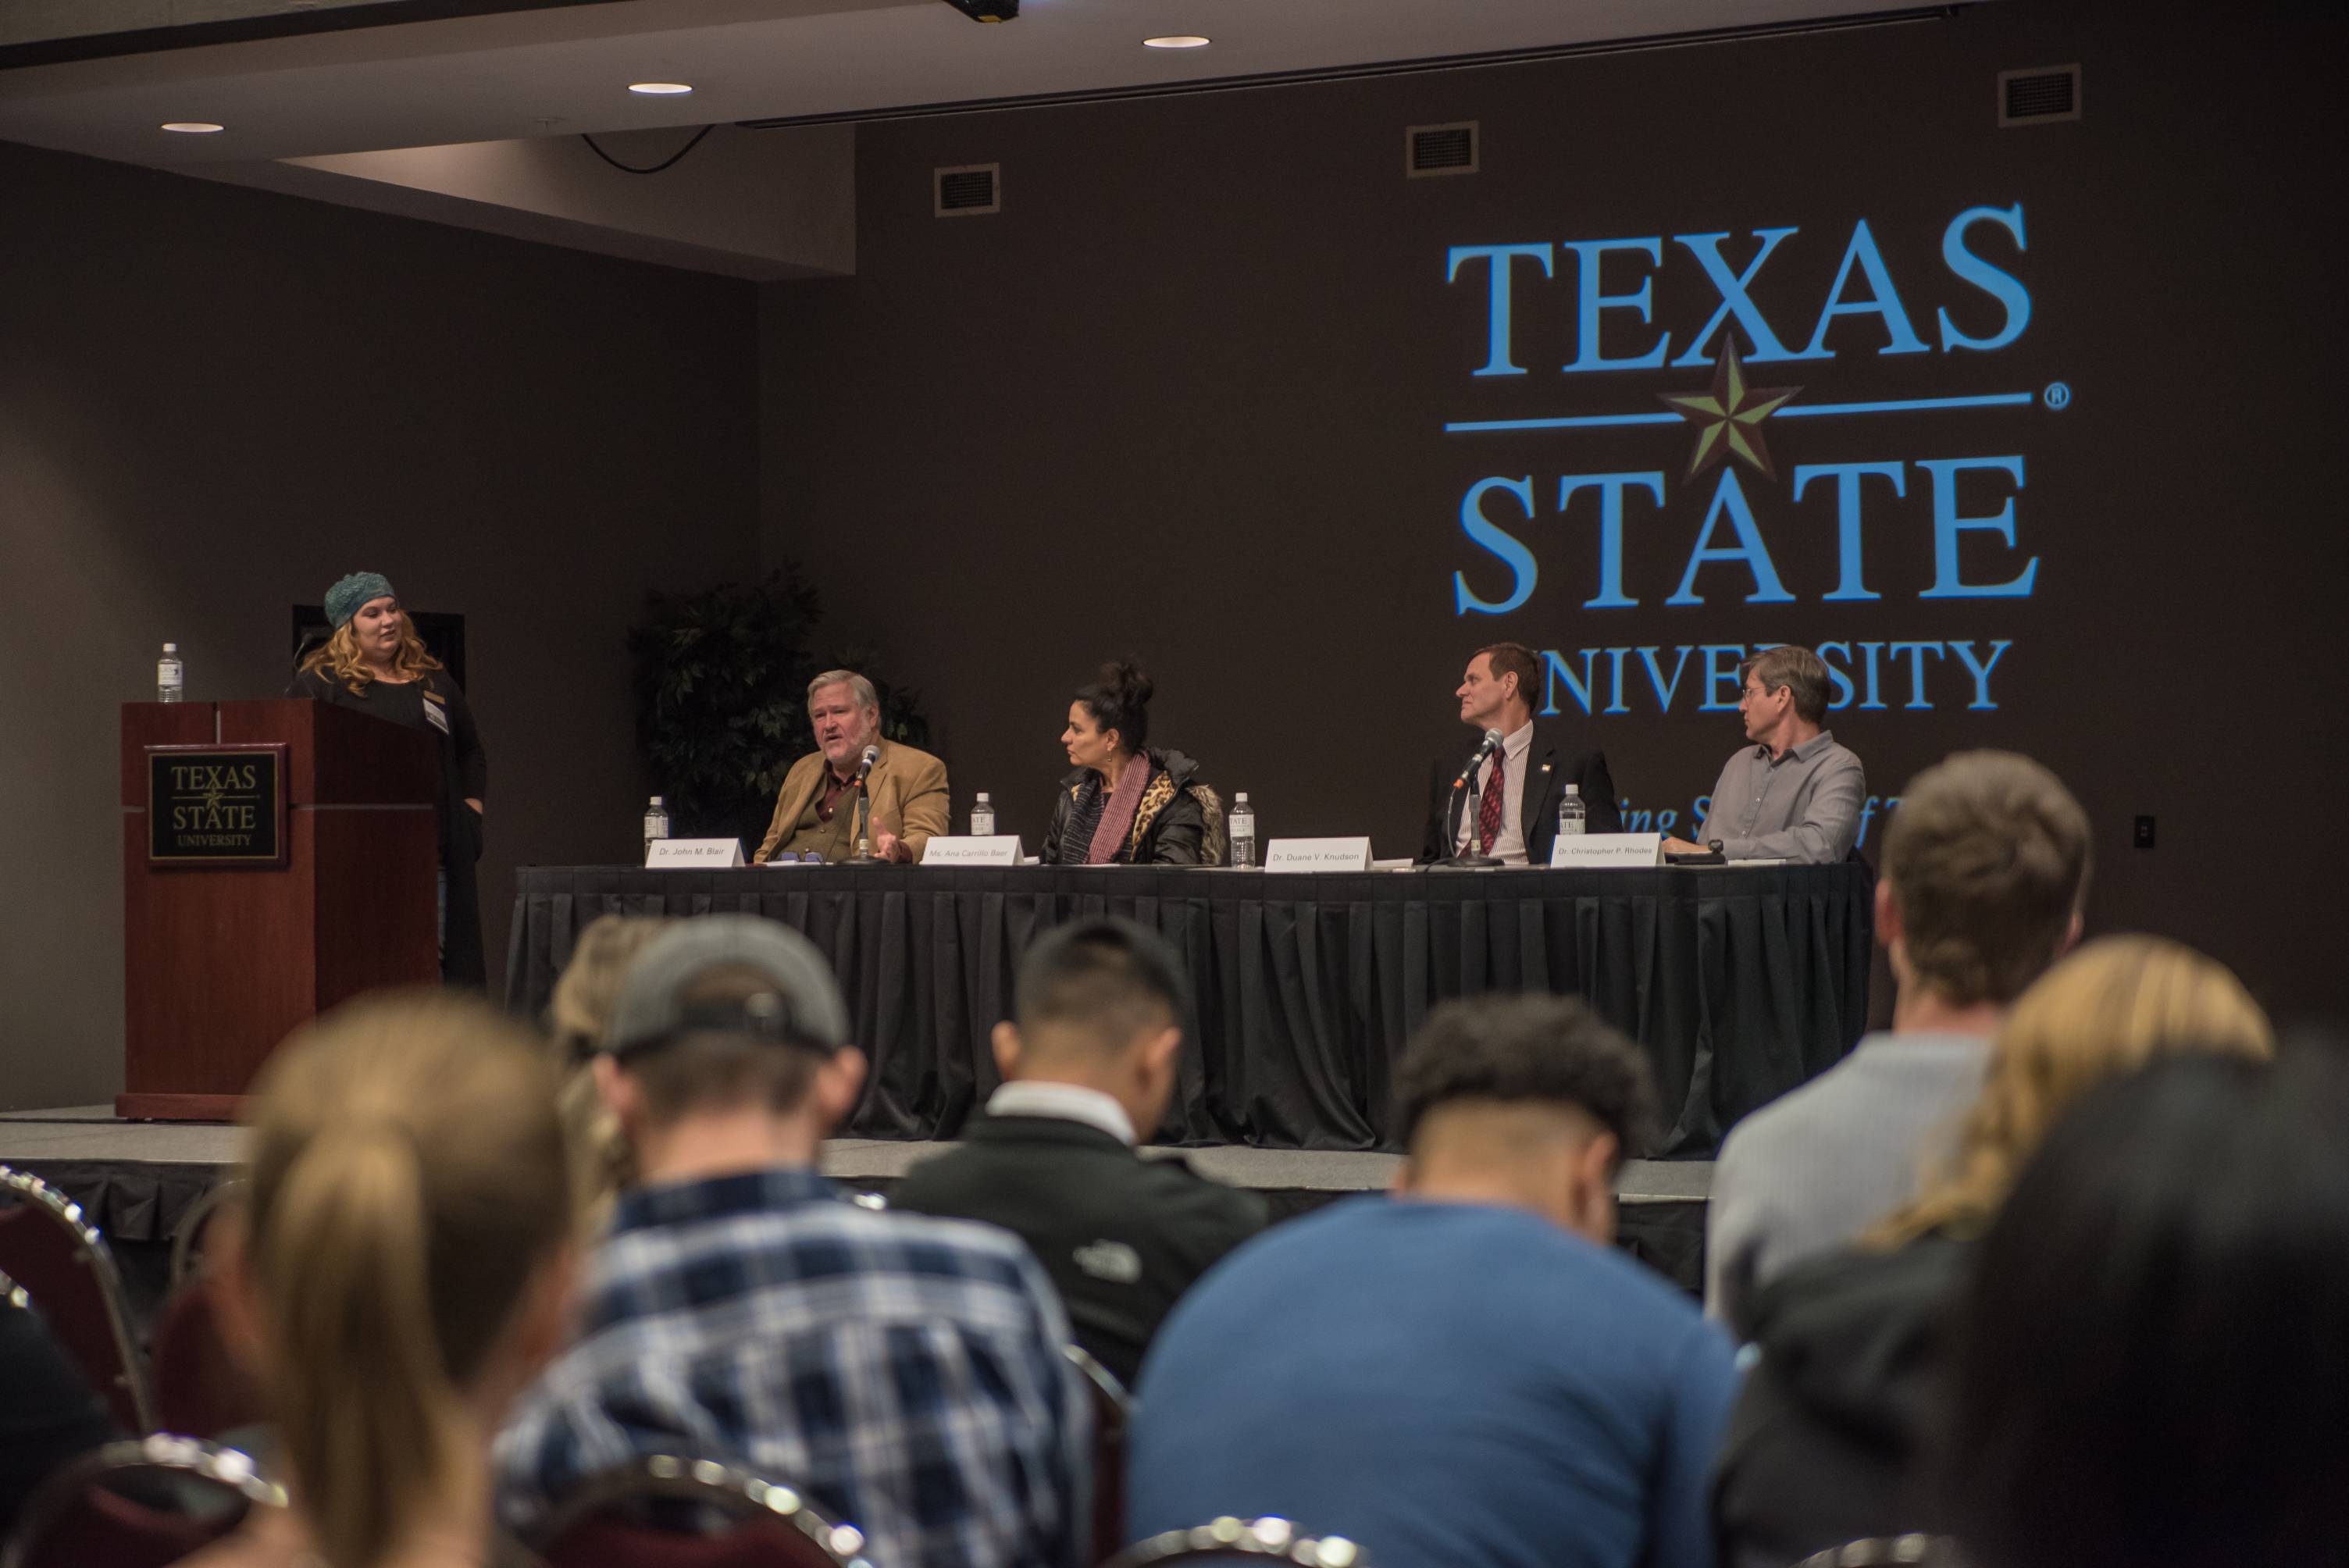 a panel of speaker sit at the front of a room in front of a large Texas State logo